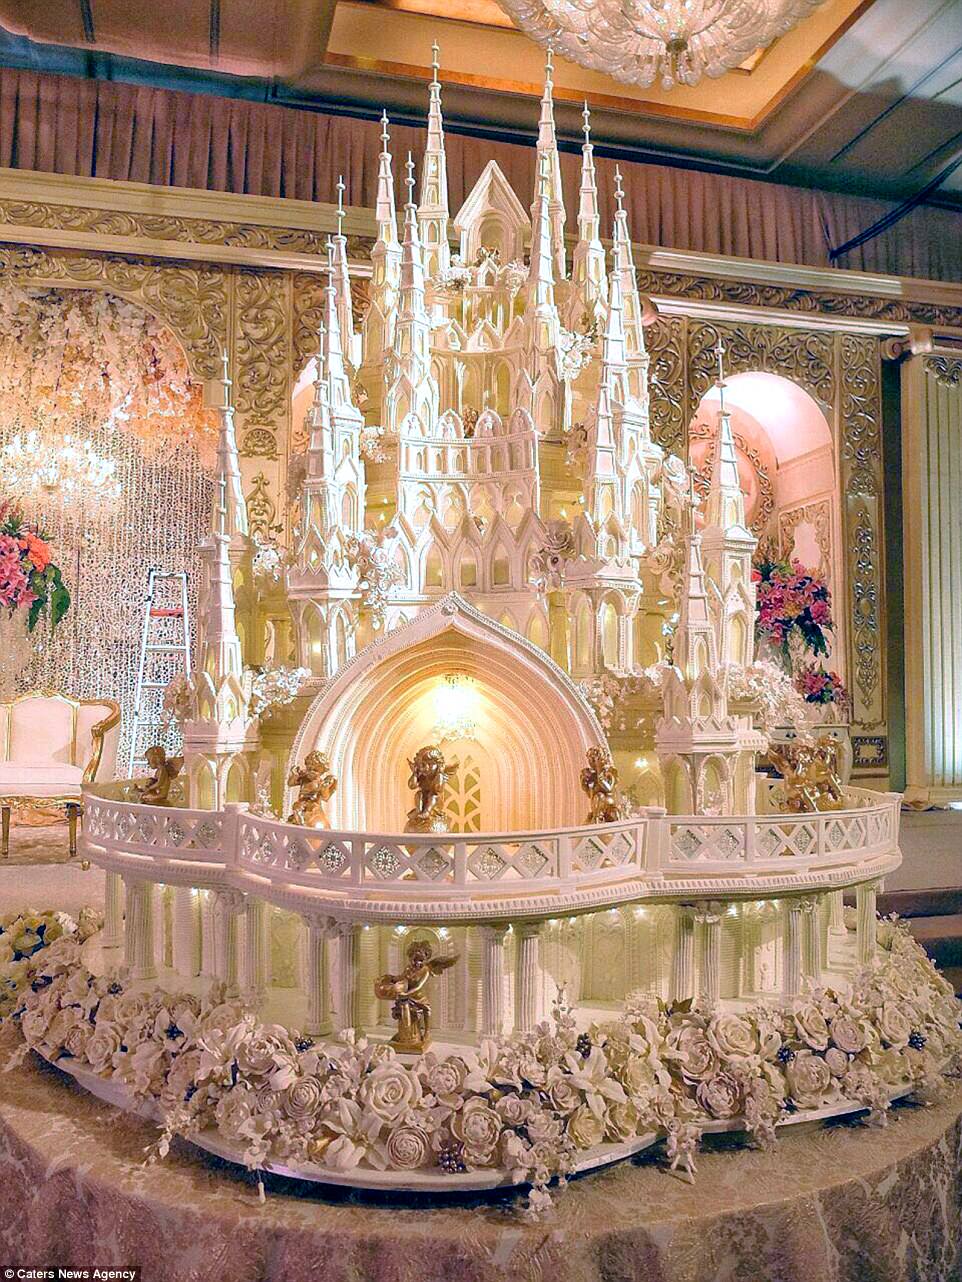 This cathedral wedding cake has been decorated with hundreds of delicate sugar flowers, some of which have been brushed with silver and gold. Adorning the outside are golden cherubs. One of these cakes takes about a month to make